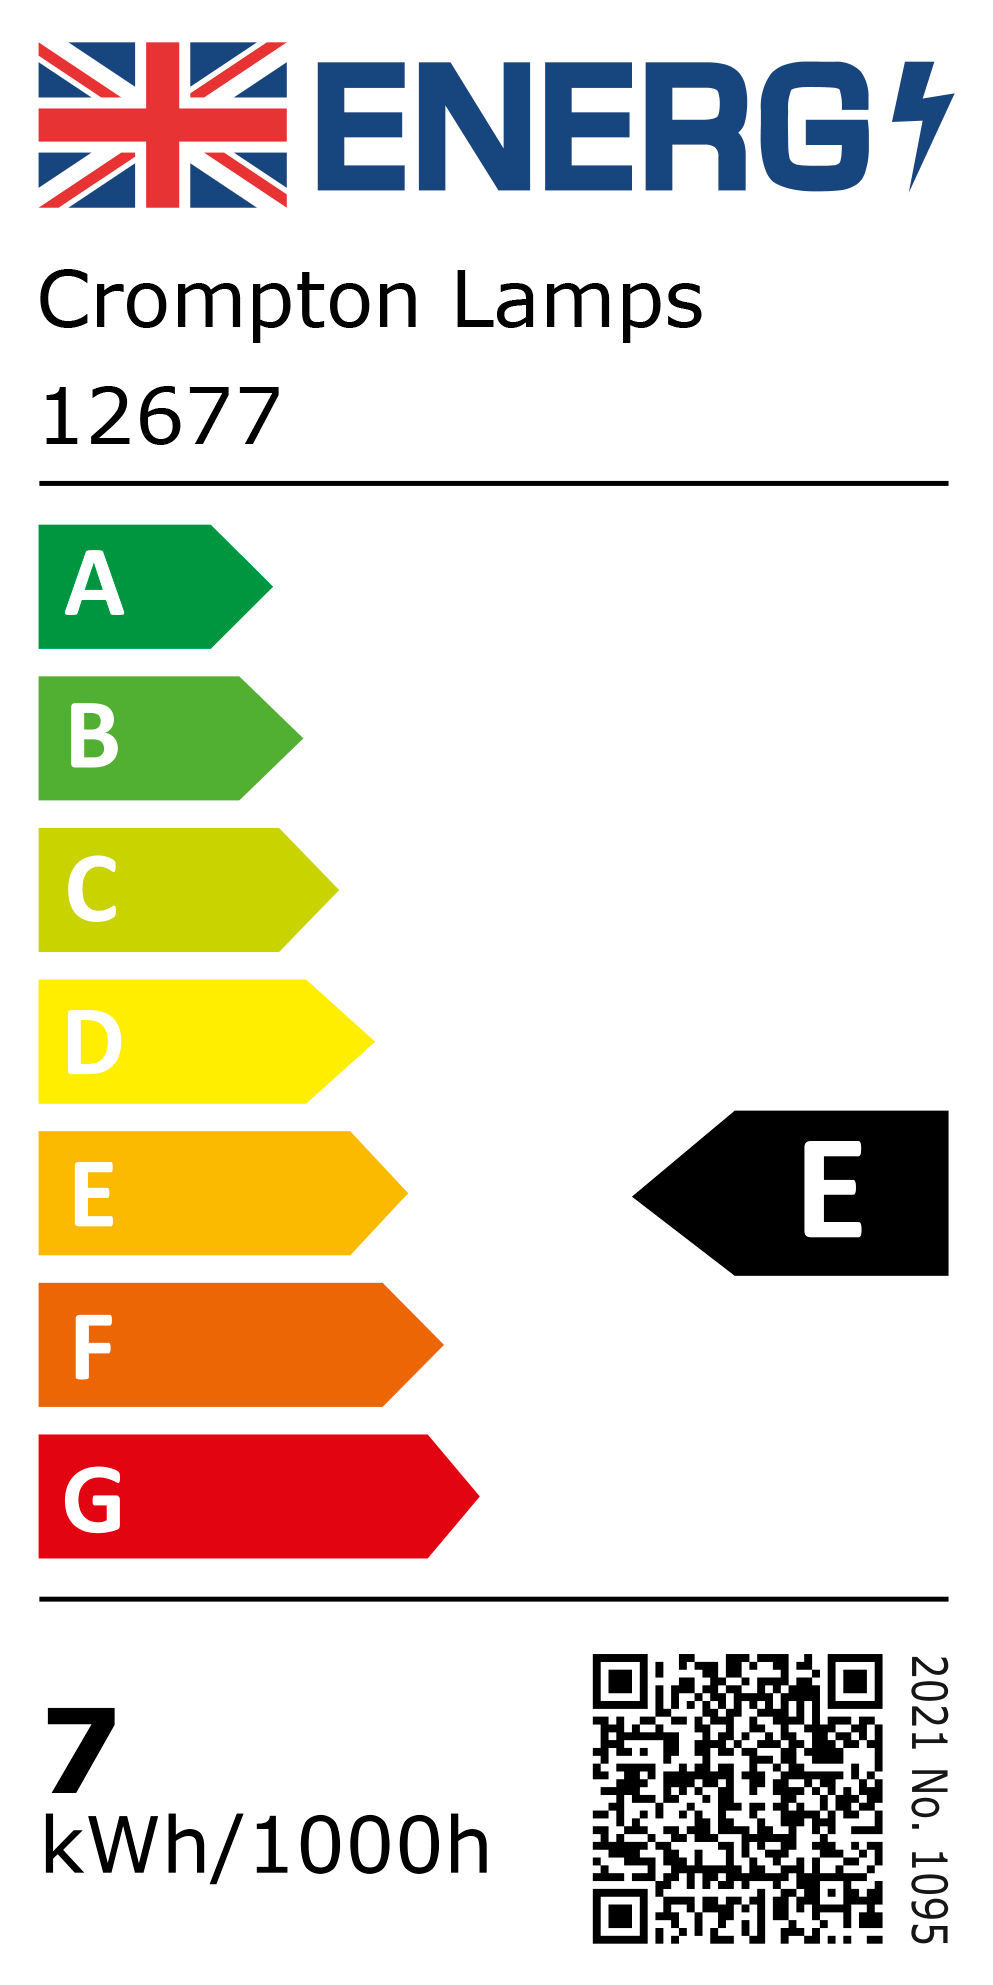 New 2021 Energy Rating Label: Stock Code 12677